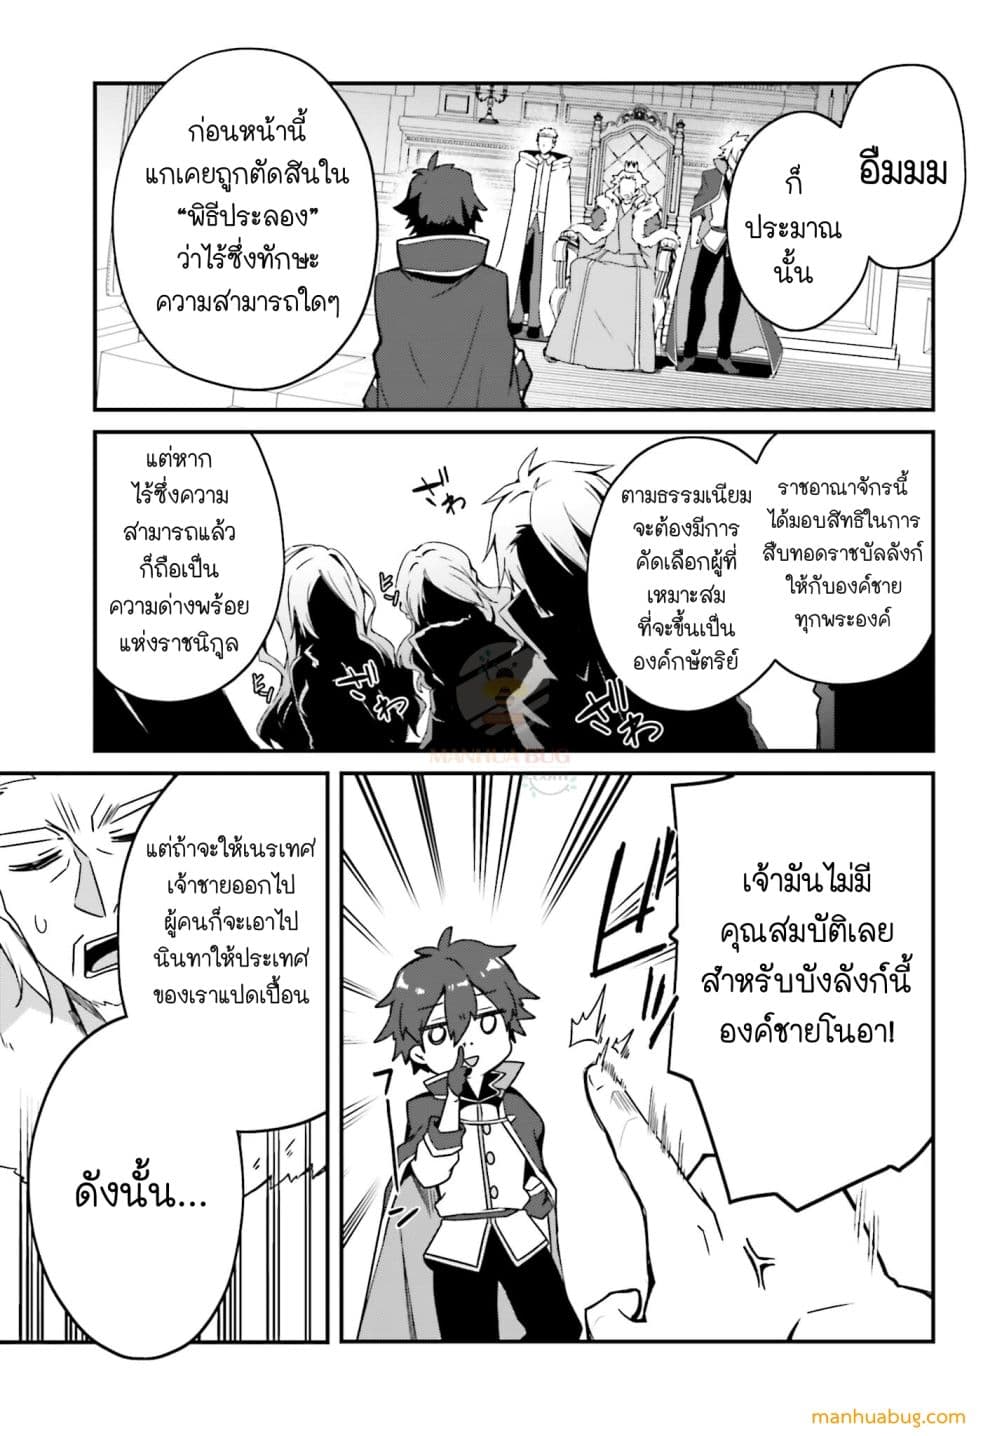 THE INCOMPETENT PRINCE WHO HAS BEEN BANISHED WANTS TO HIDE HIS ABILITIES~ ตอนที่ 1 (6)